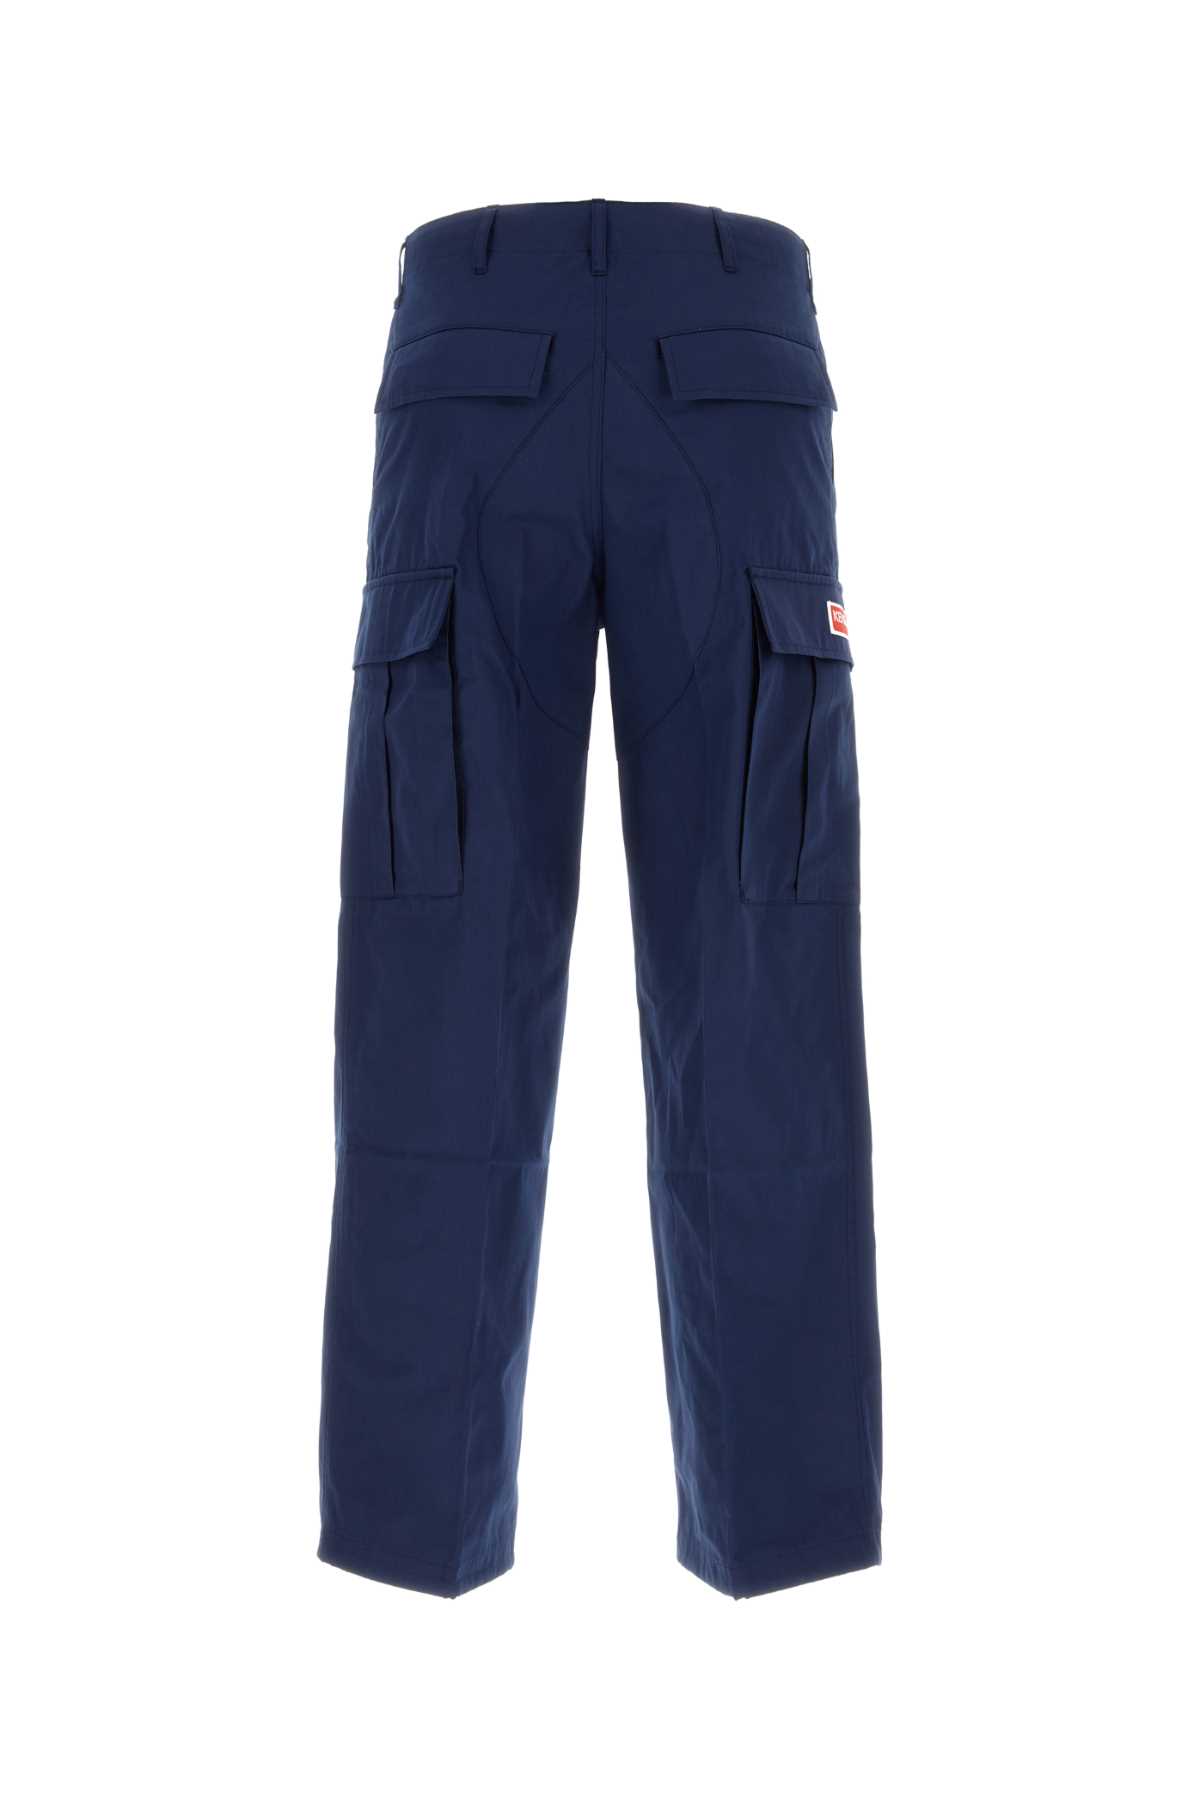 Kenzo Blue Cotton Cargo Pant In 77